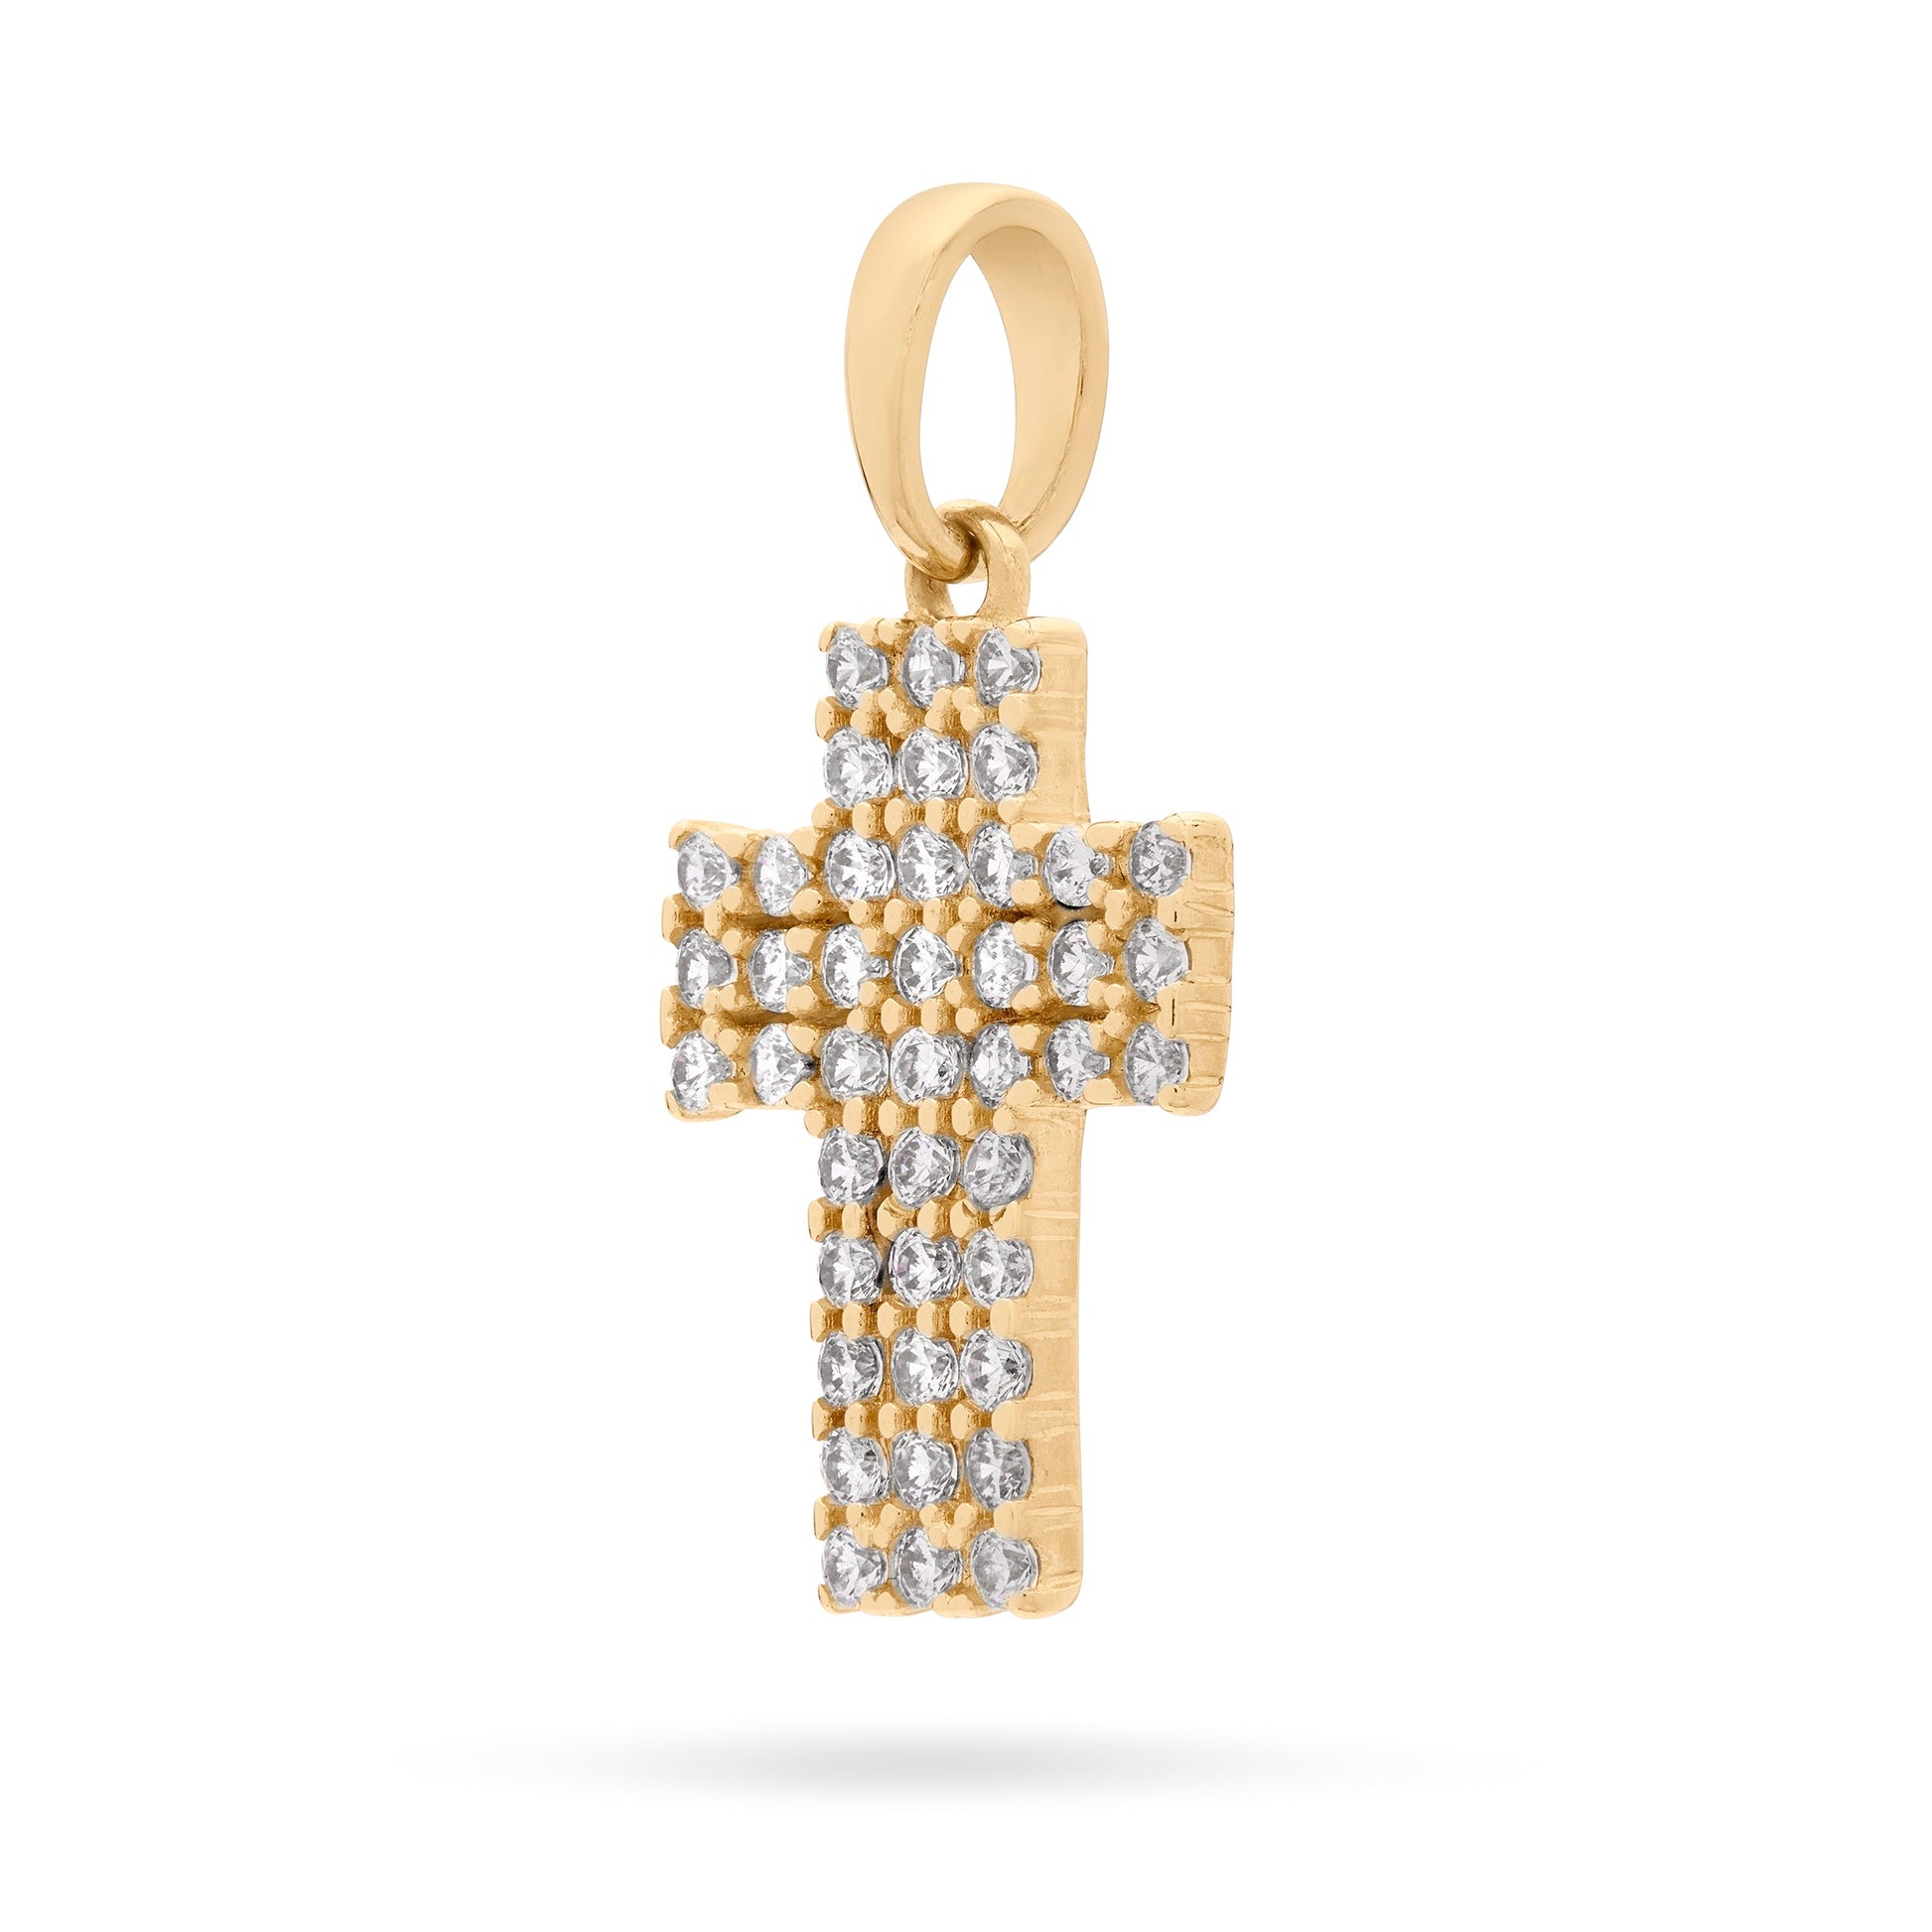 Mondo Cattolico Pendant 12 mm (0.47 in) Yellow Gold Cross Pendant Covered With Cubic Zirconia